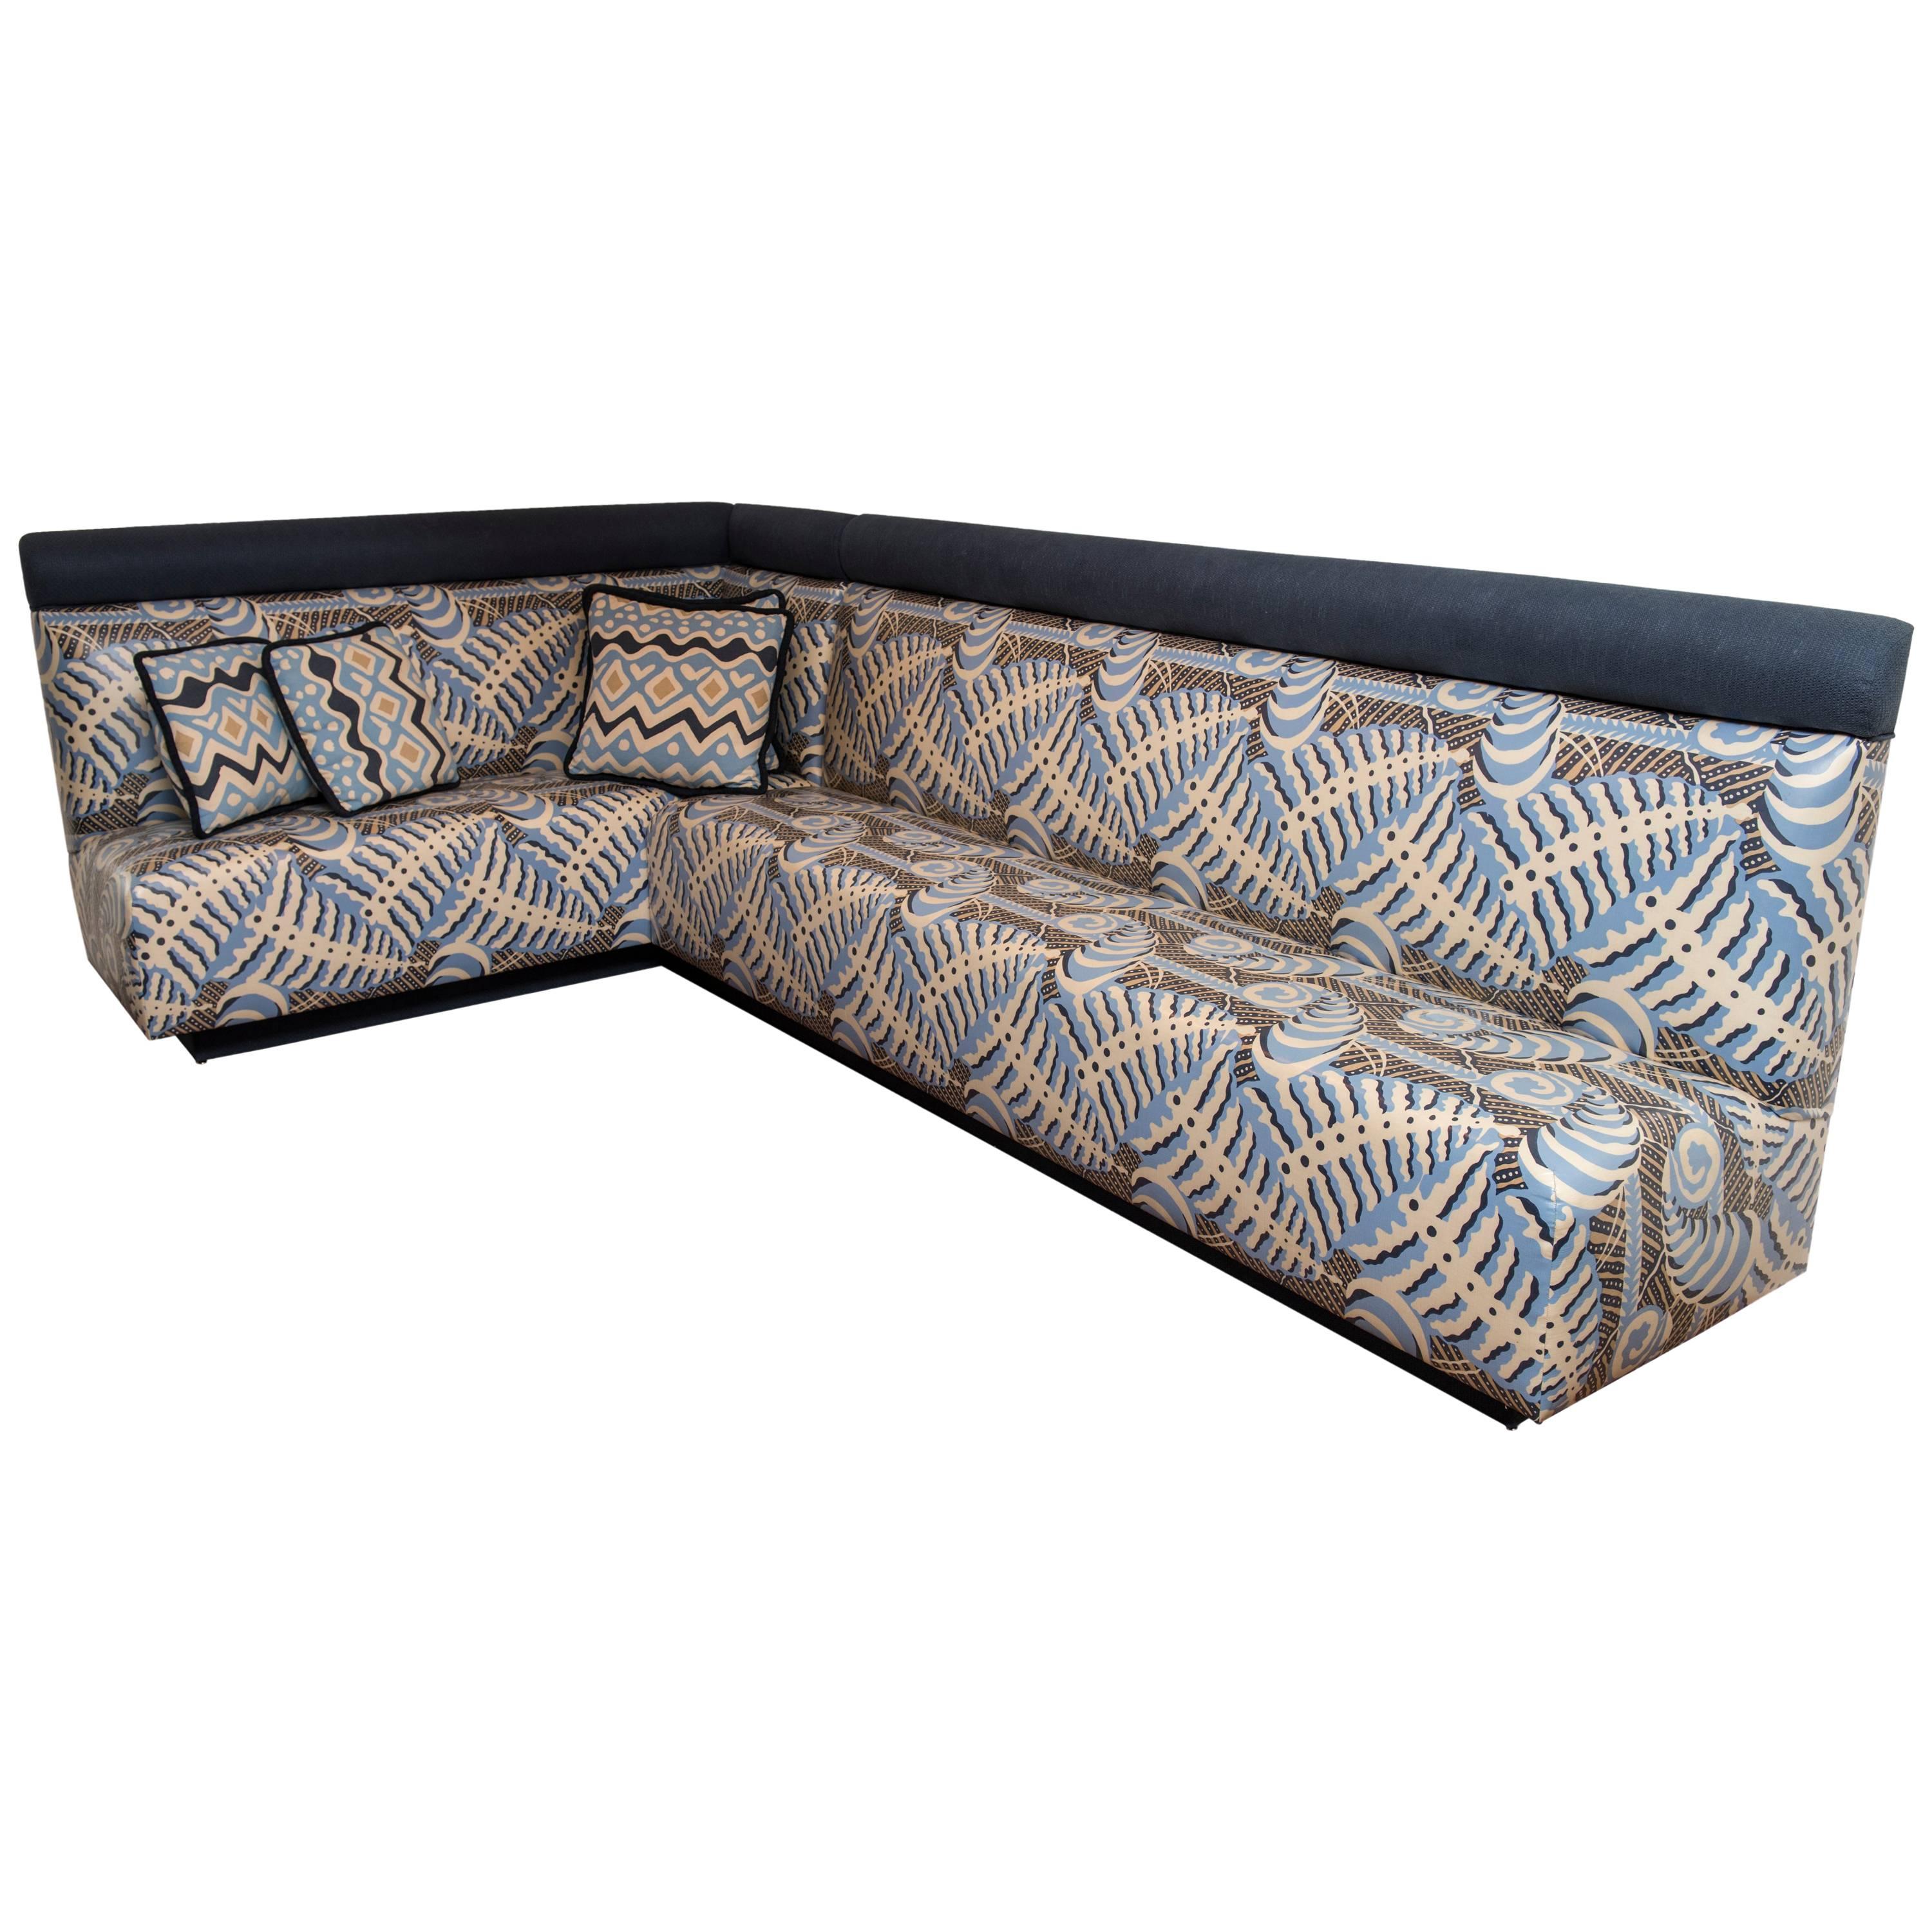 Upholstered Banquette For Sale